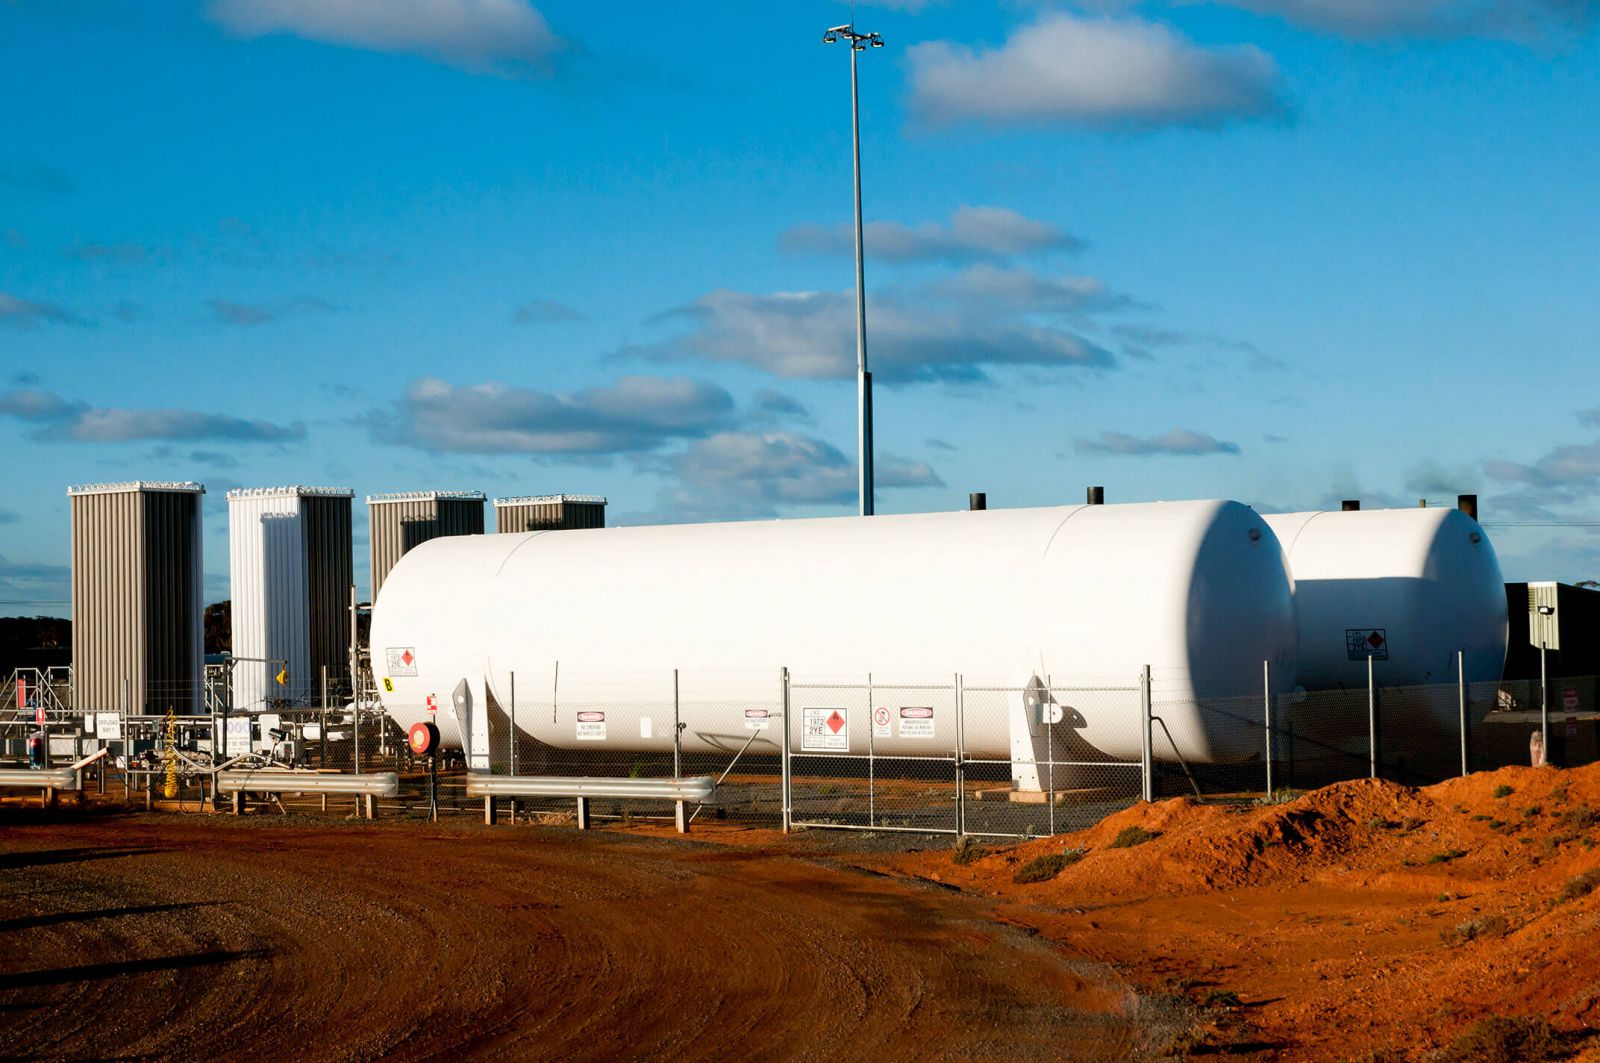 Fuel stored in industrial tanks